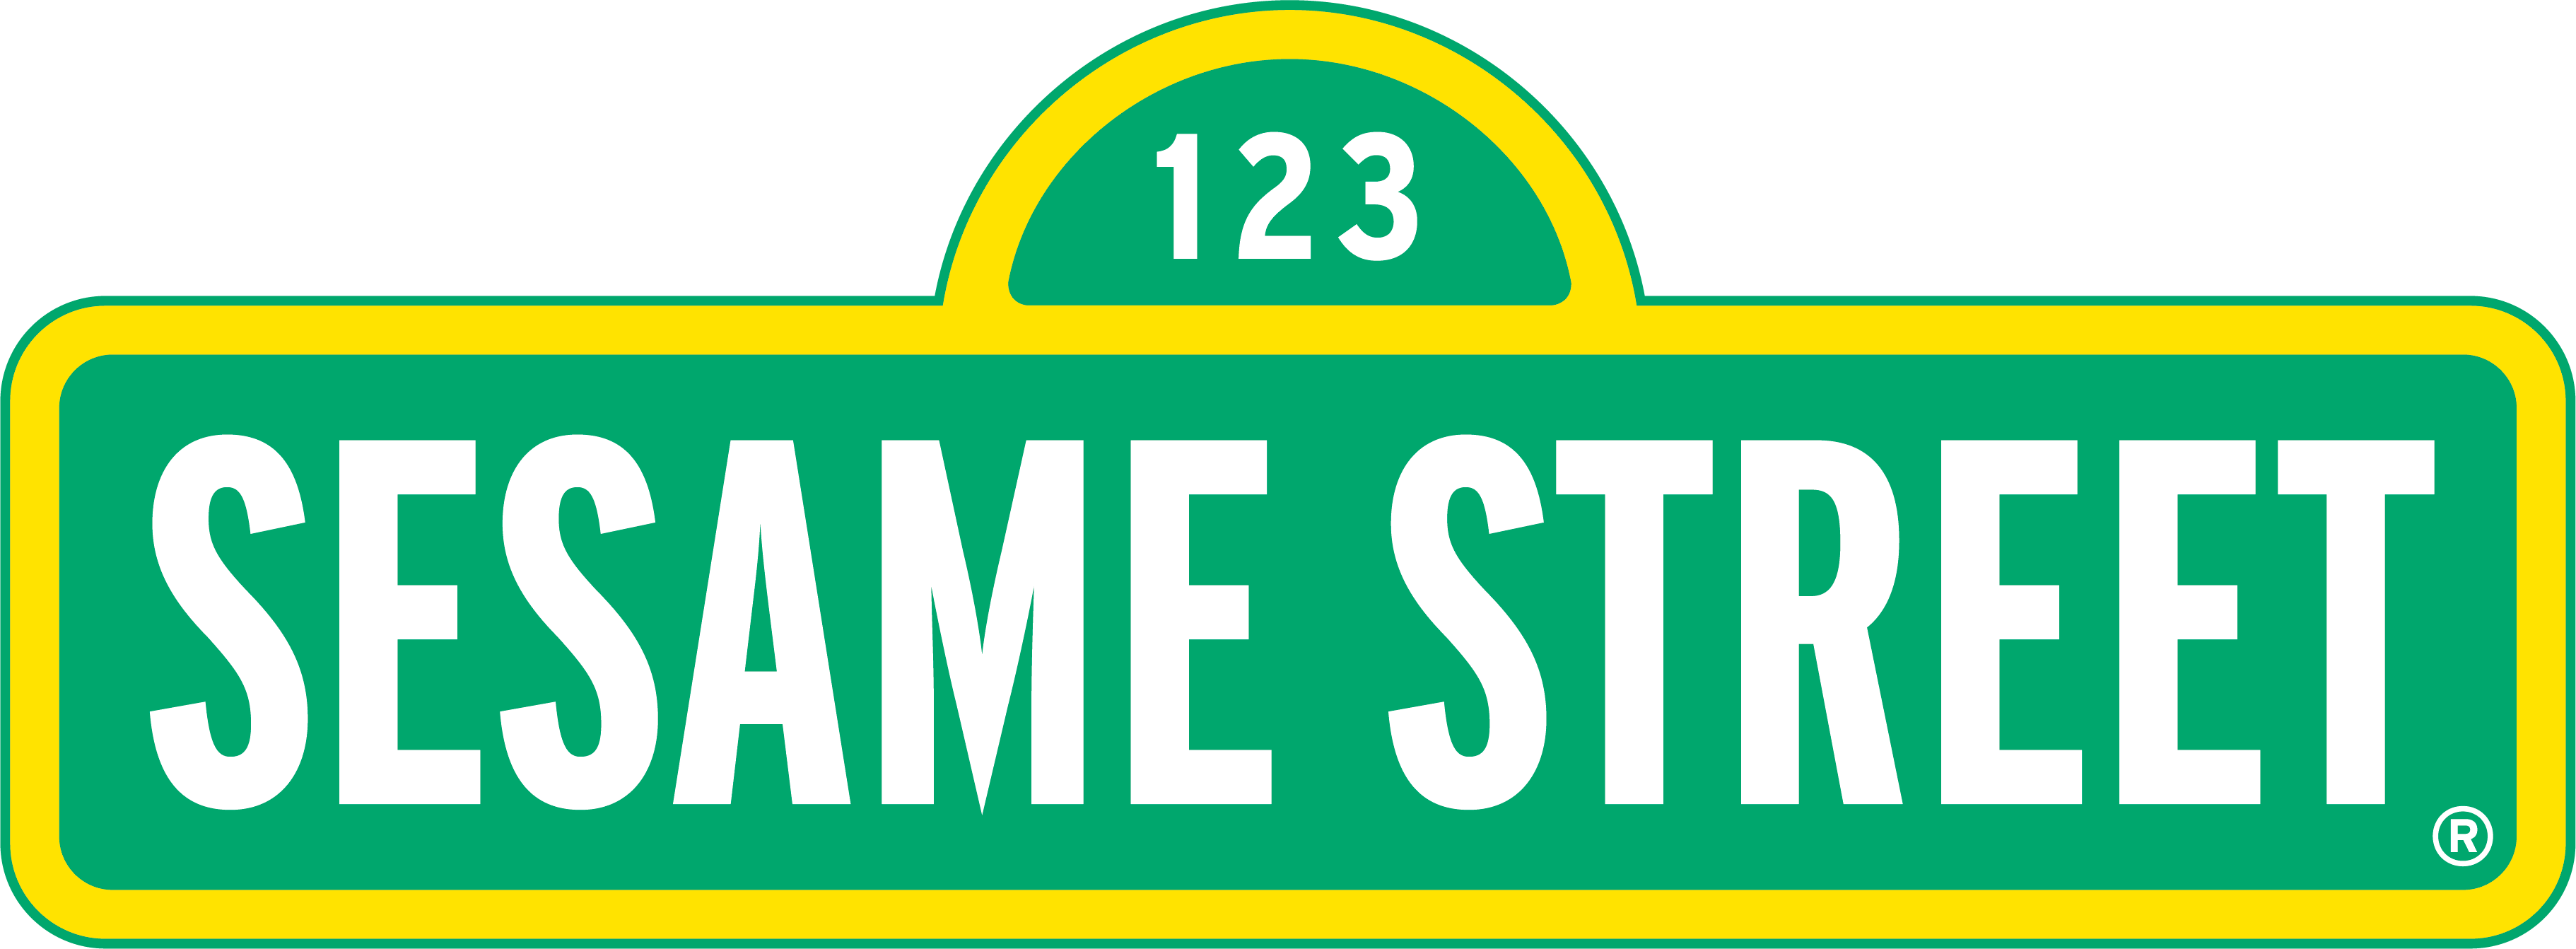 Click Here - Sesame Street Sign Template (3644x1342)